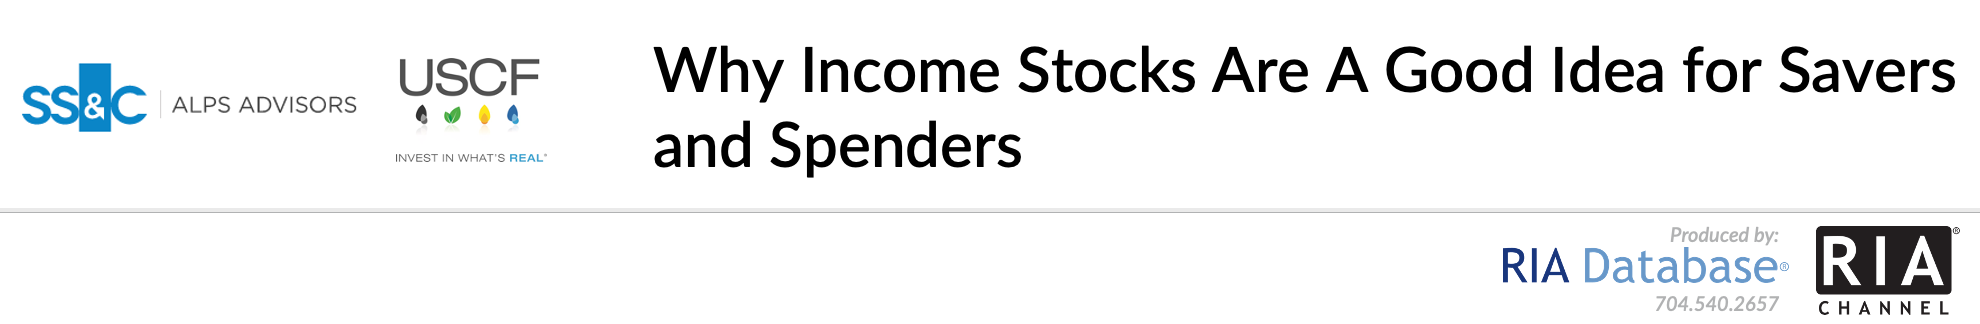 Why Income Stocks Are A Good Idea for Savers and Spenders